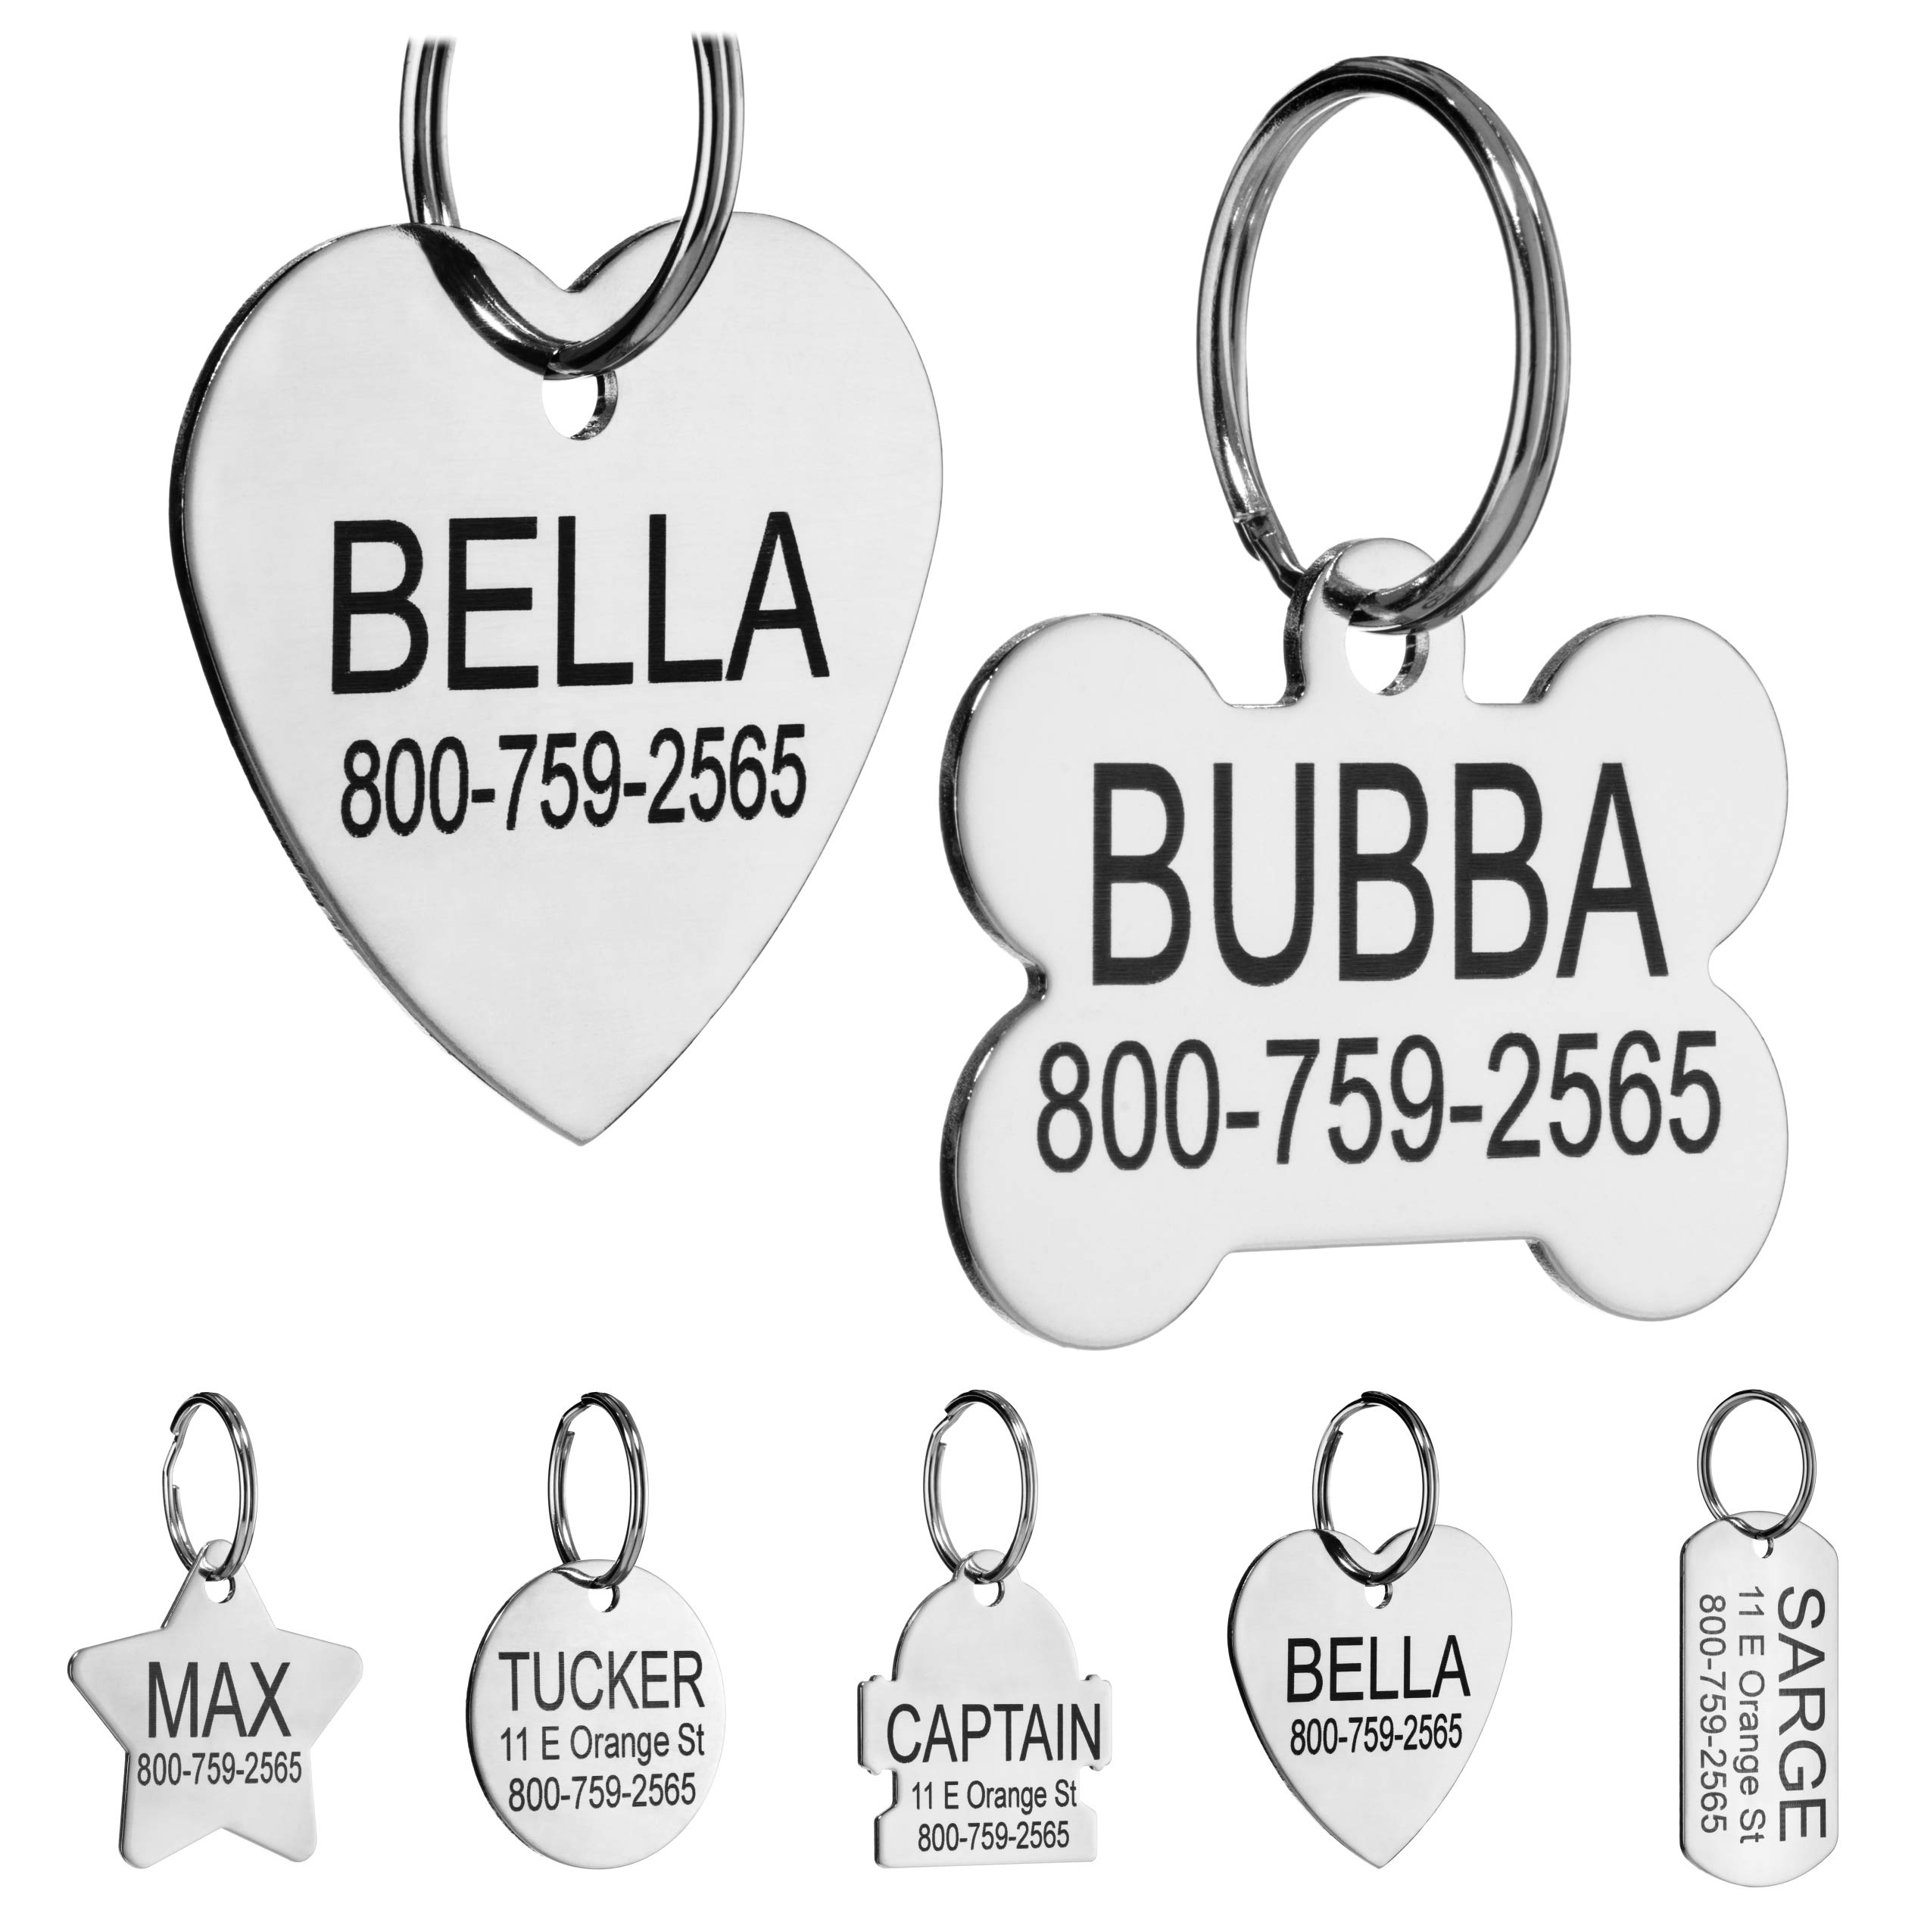 Providence Engraving Custom Engraved Stainless Steel Pet ID Tags - Personalized Front and Back Identification, For Large or Smal